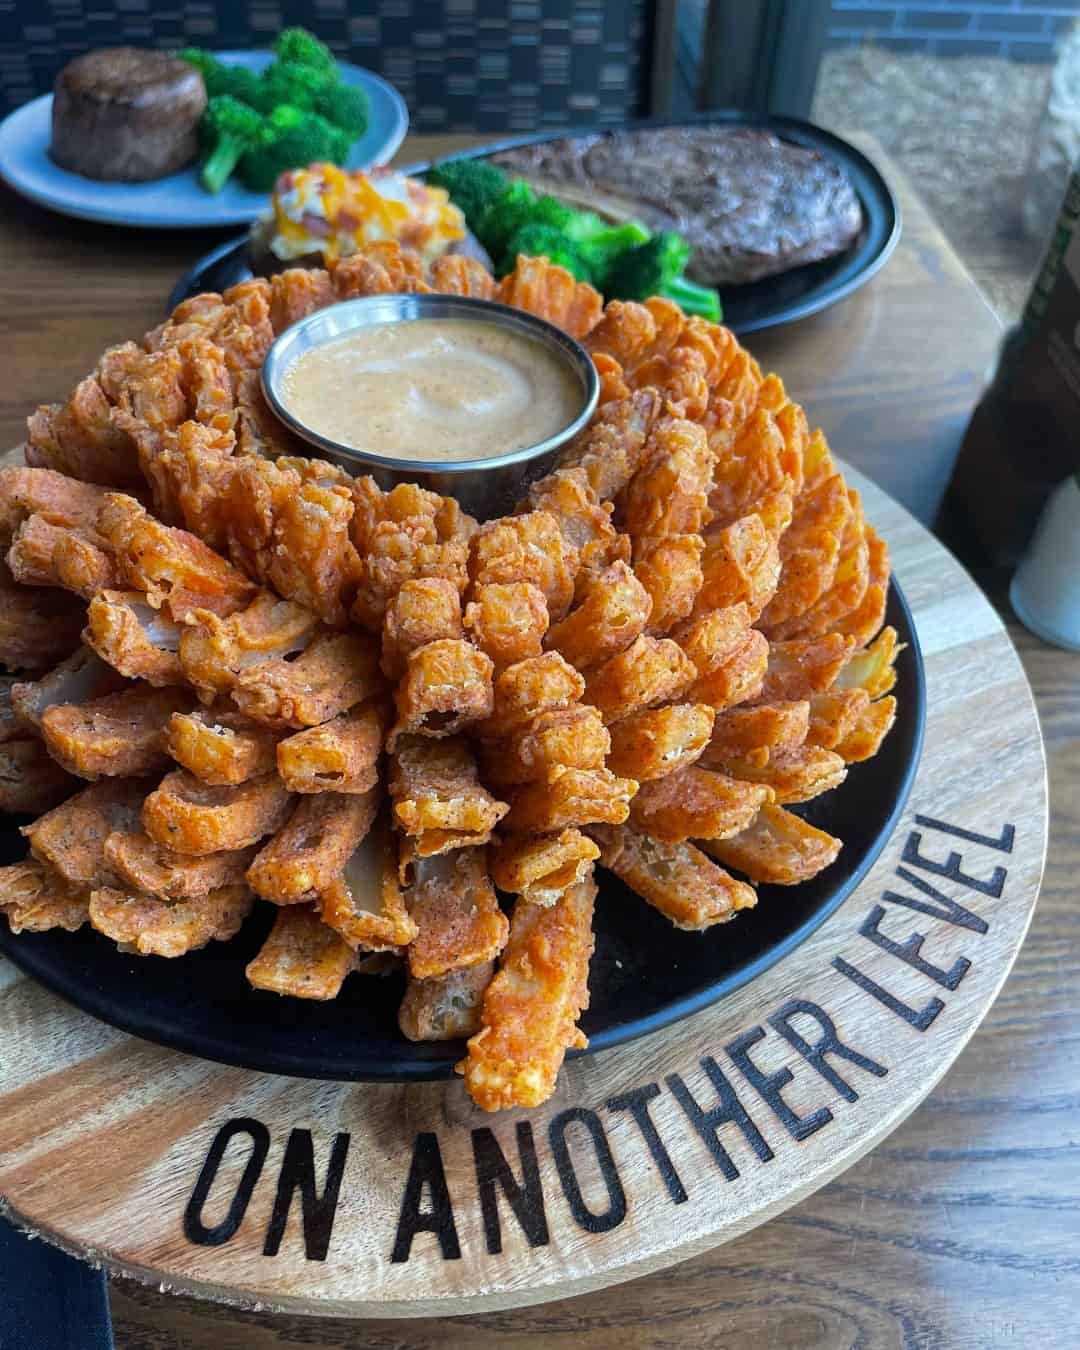 Enjoy Free Bloomin Onion At Outback Steakhouse On National Onion Day Living On The Cheap